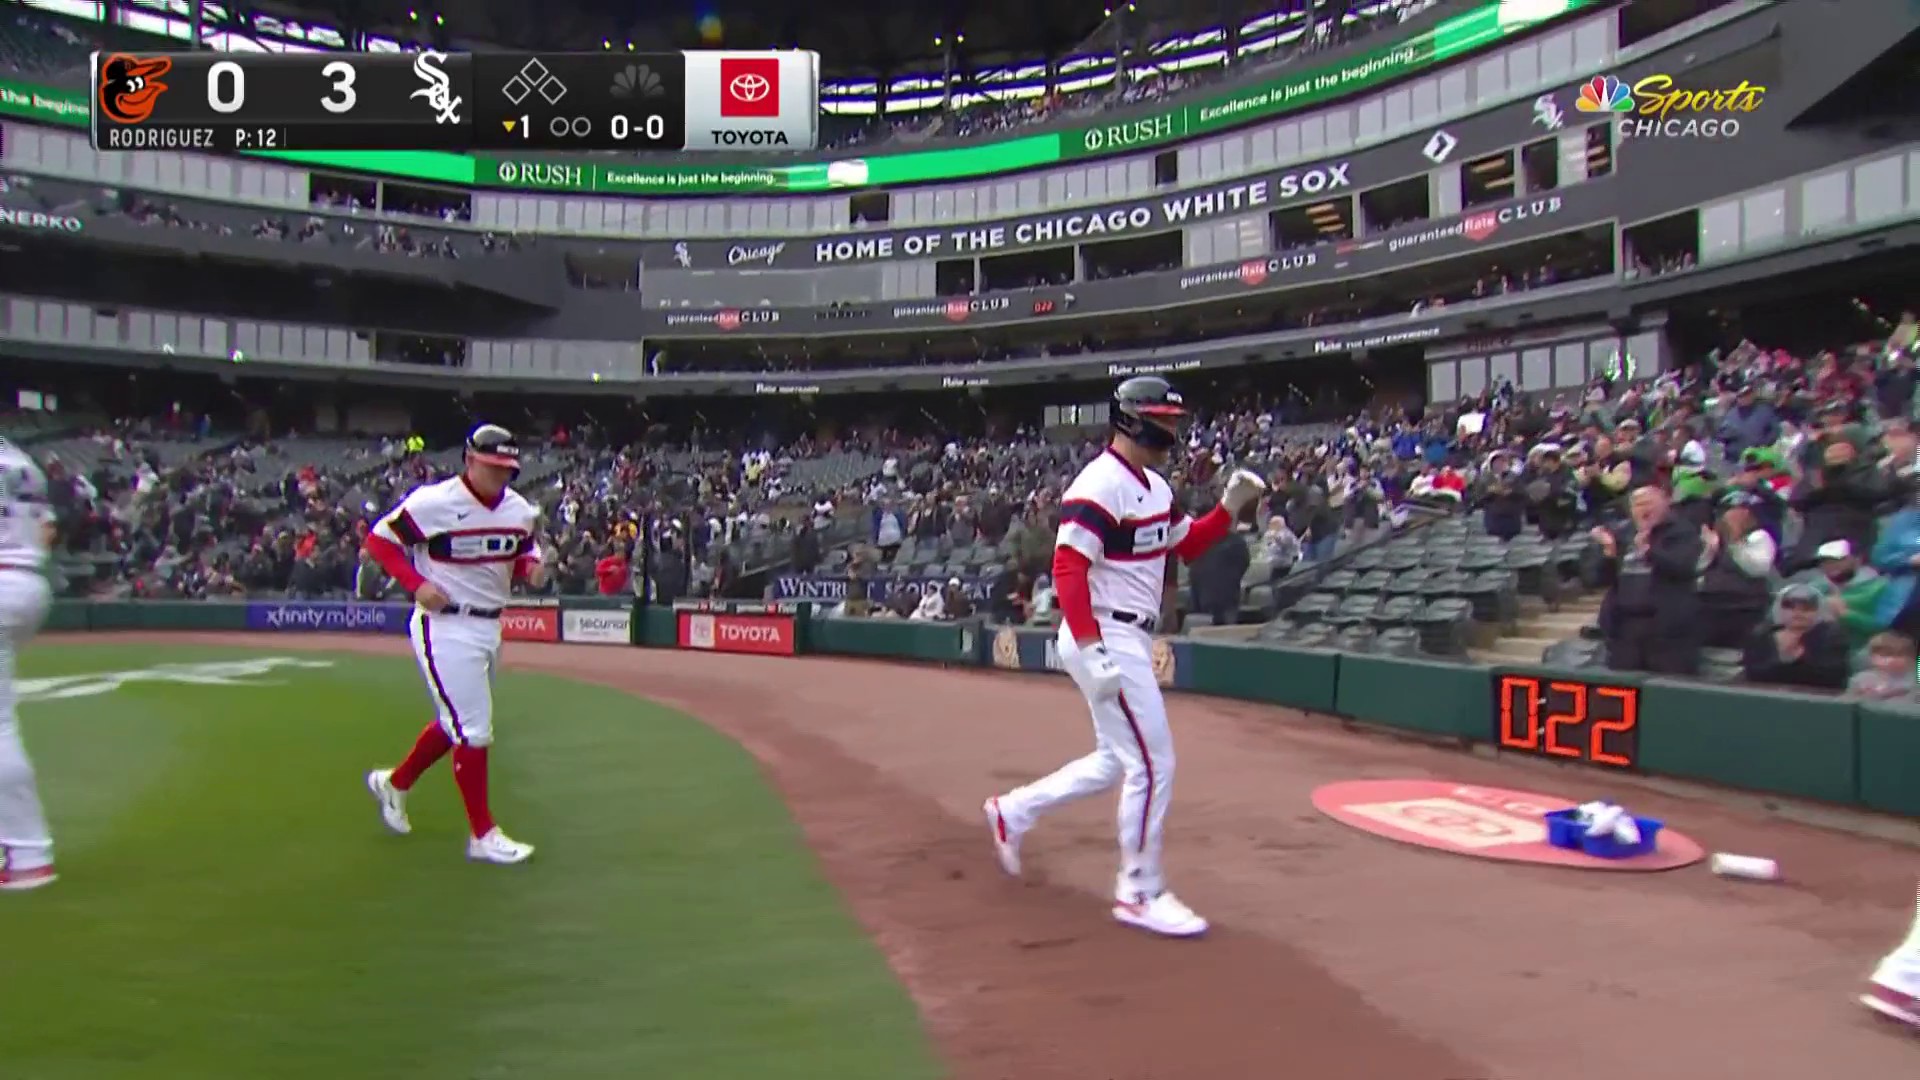 WATCH: Gavin Sheets two-run HR extends White Sox' lead vs. Cubs